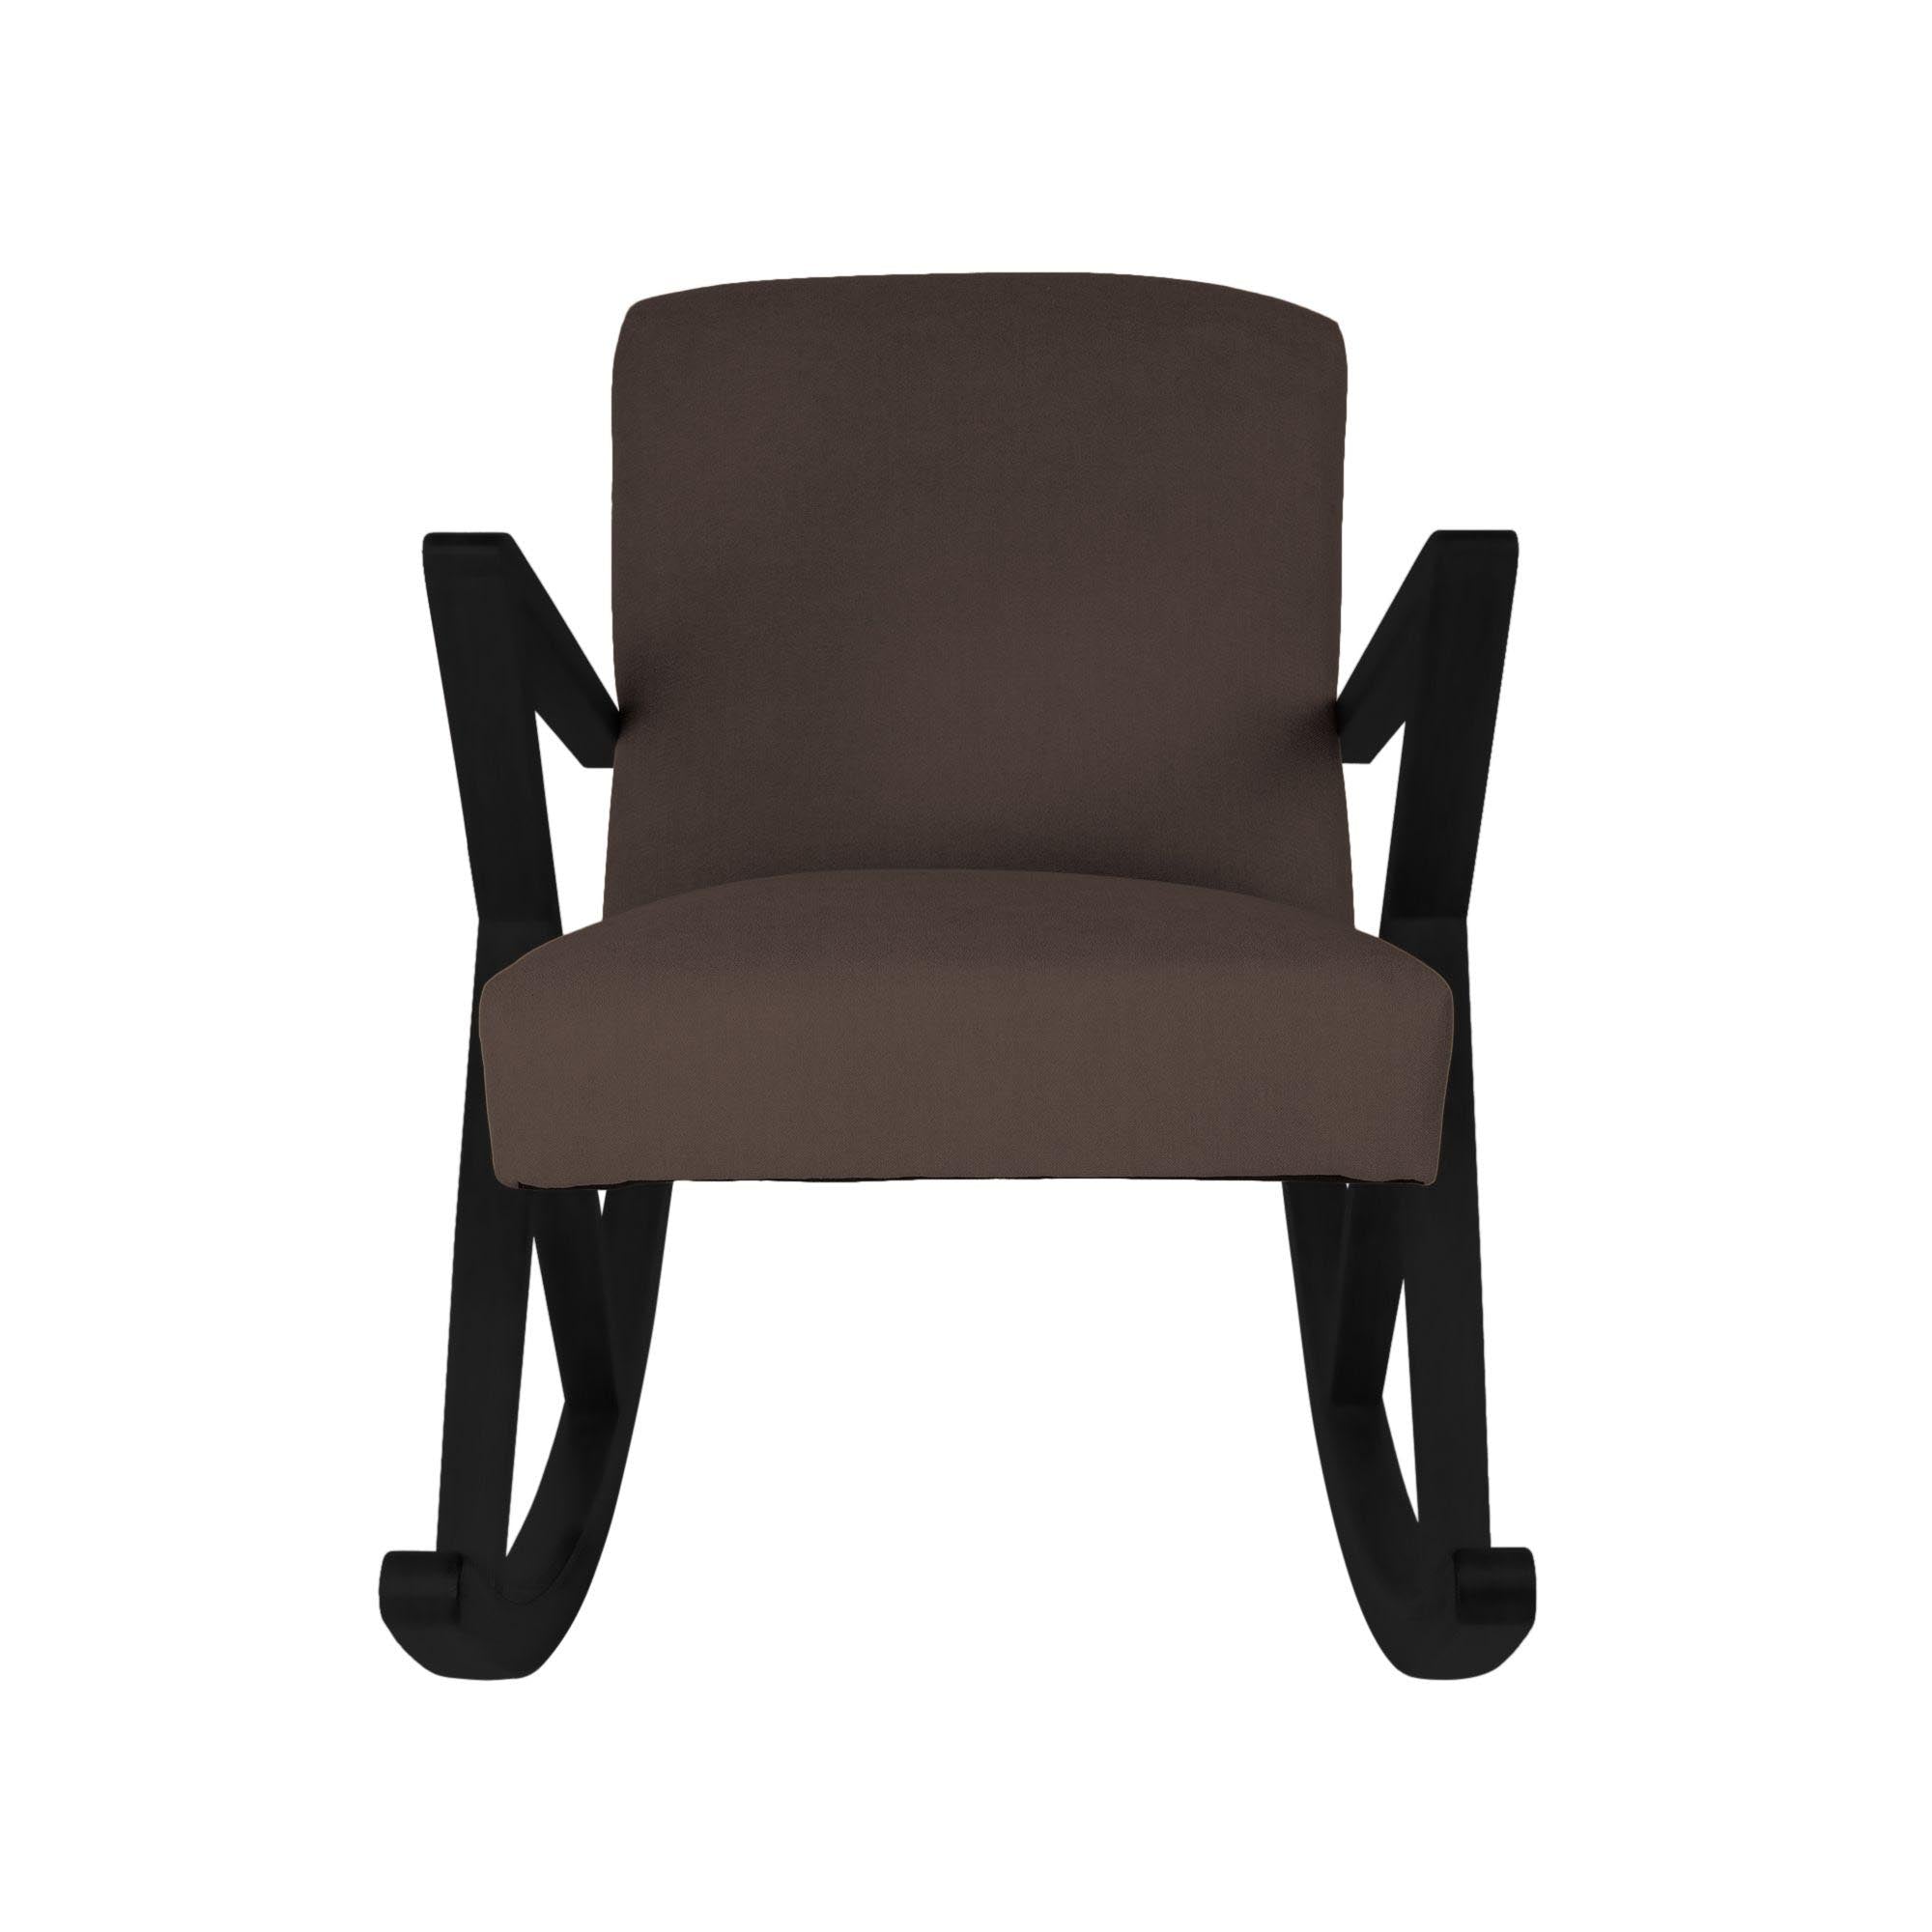 Rocking Chair, Beech Wood Frame, Black Lacquered brown fabric, front view